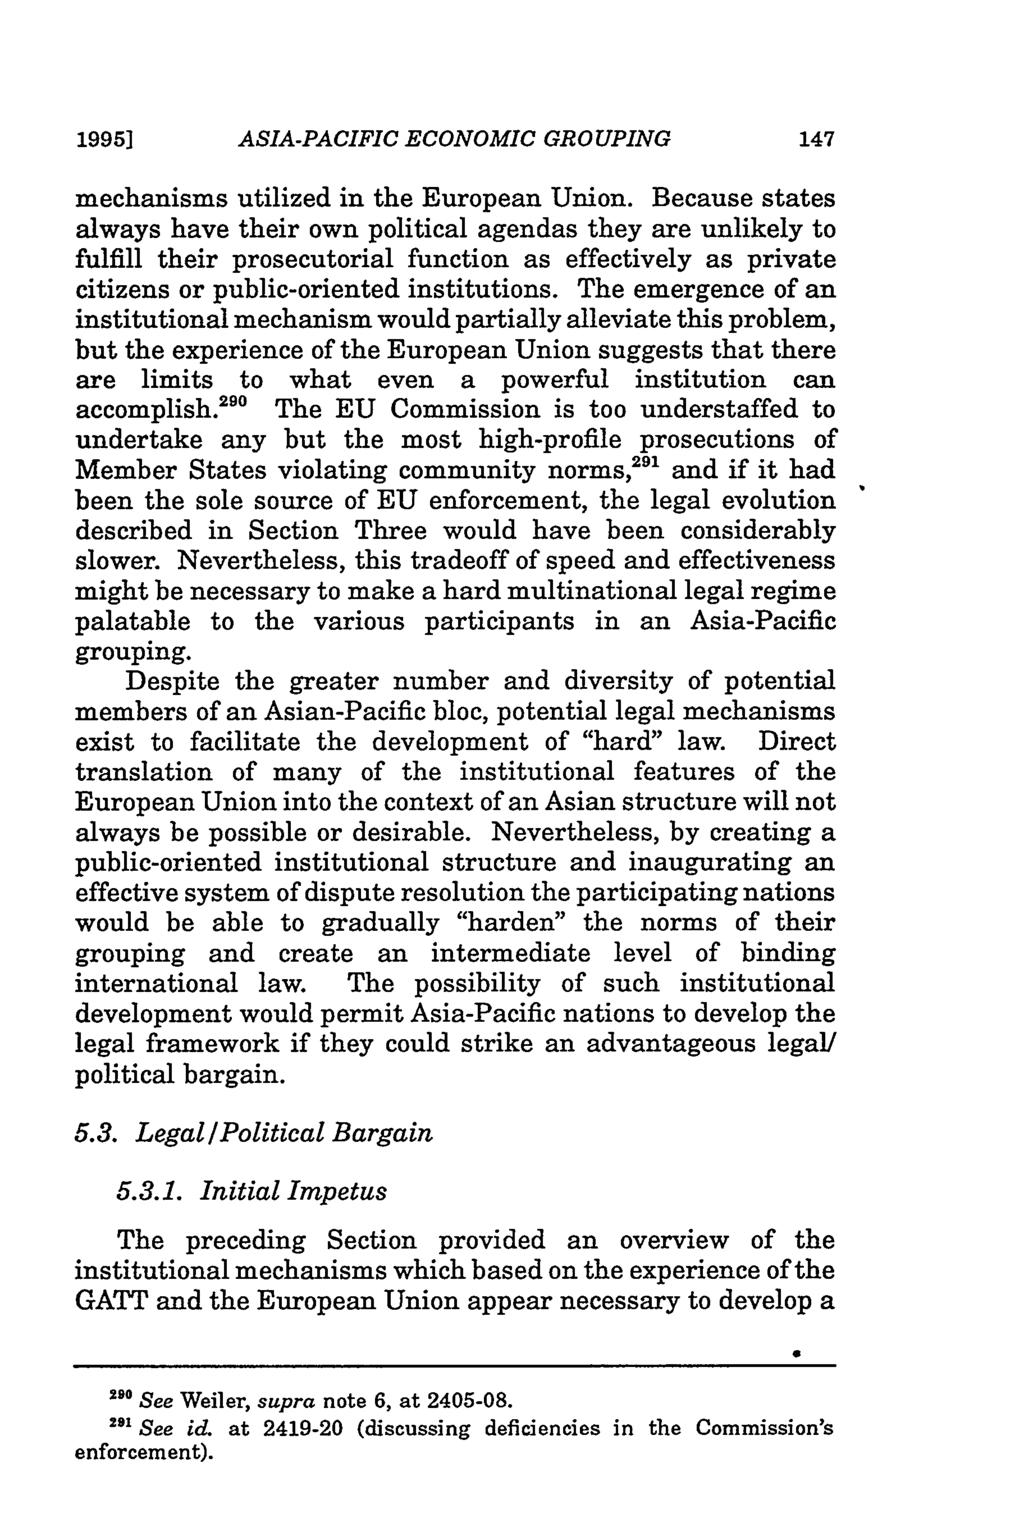 Dichter: Legal Implications of an Asia-Pacific Economic Grouping 1995] ASIA-PACIFIC ECONOMIC GROUPING mechanisms utilized in the European Union.